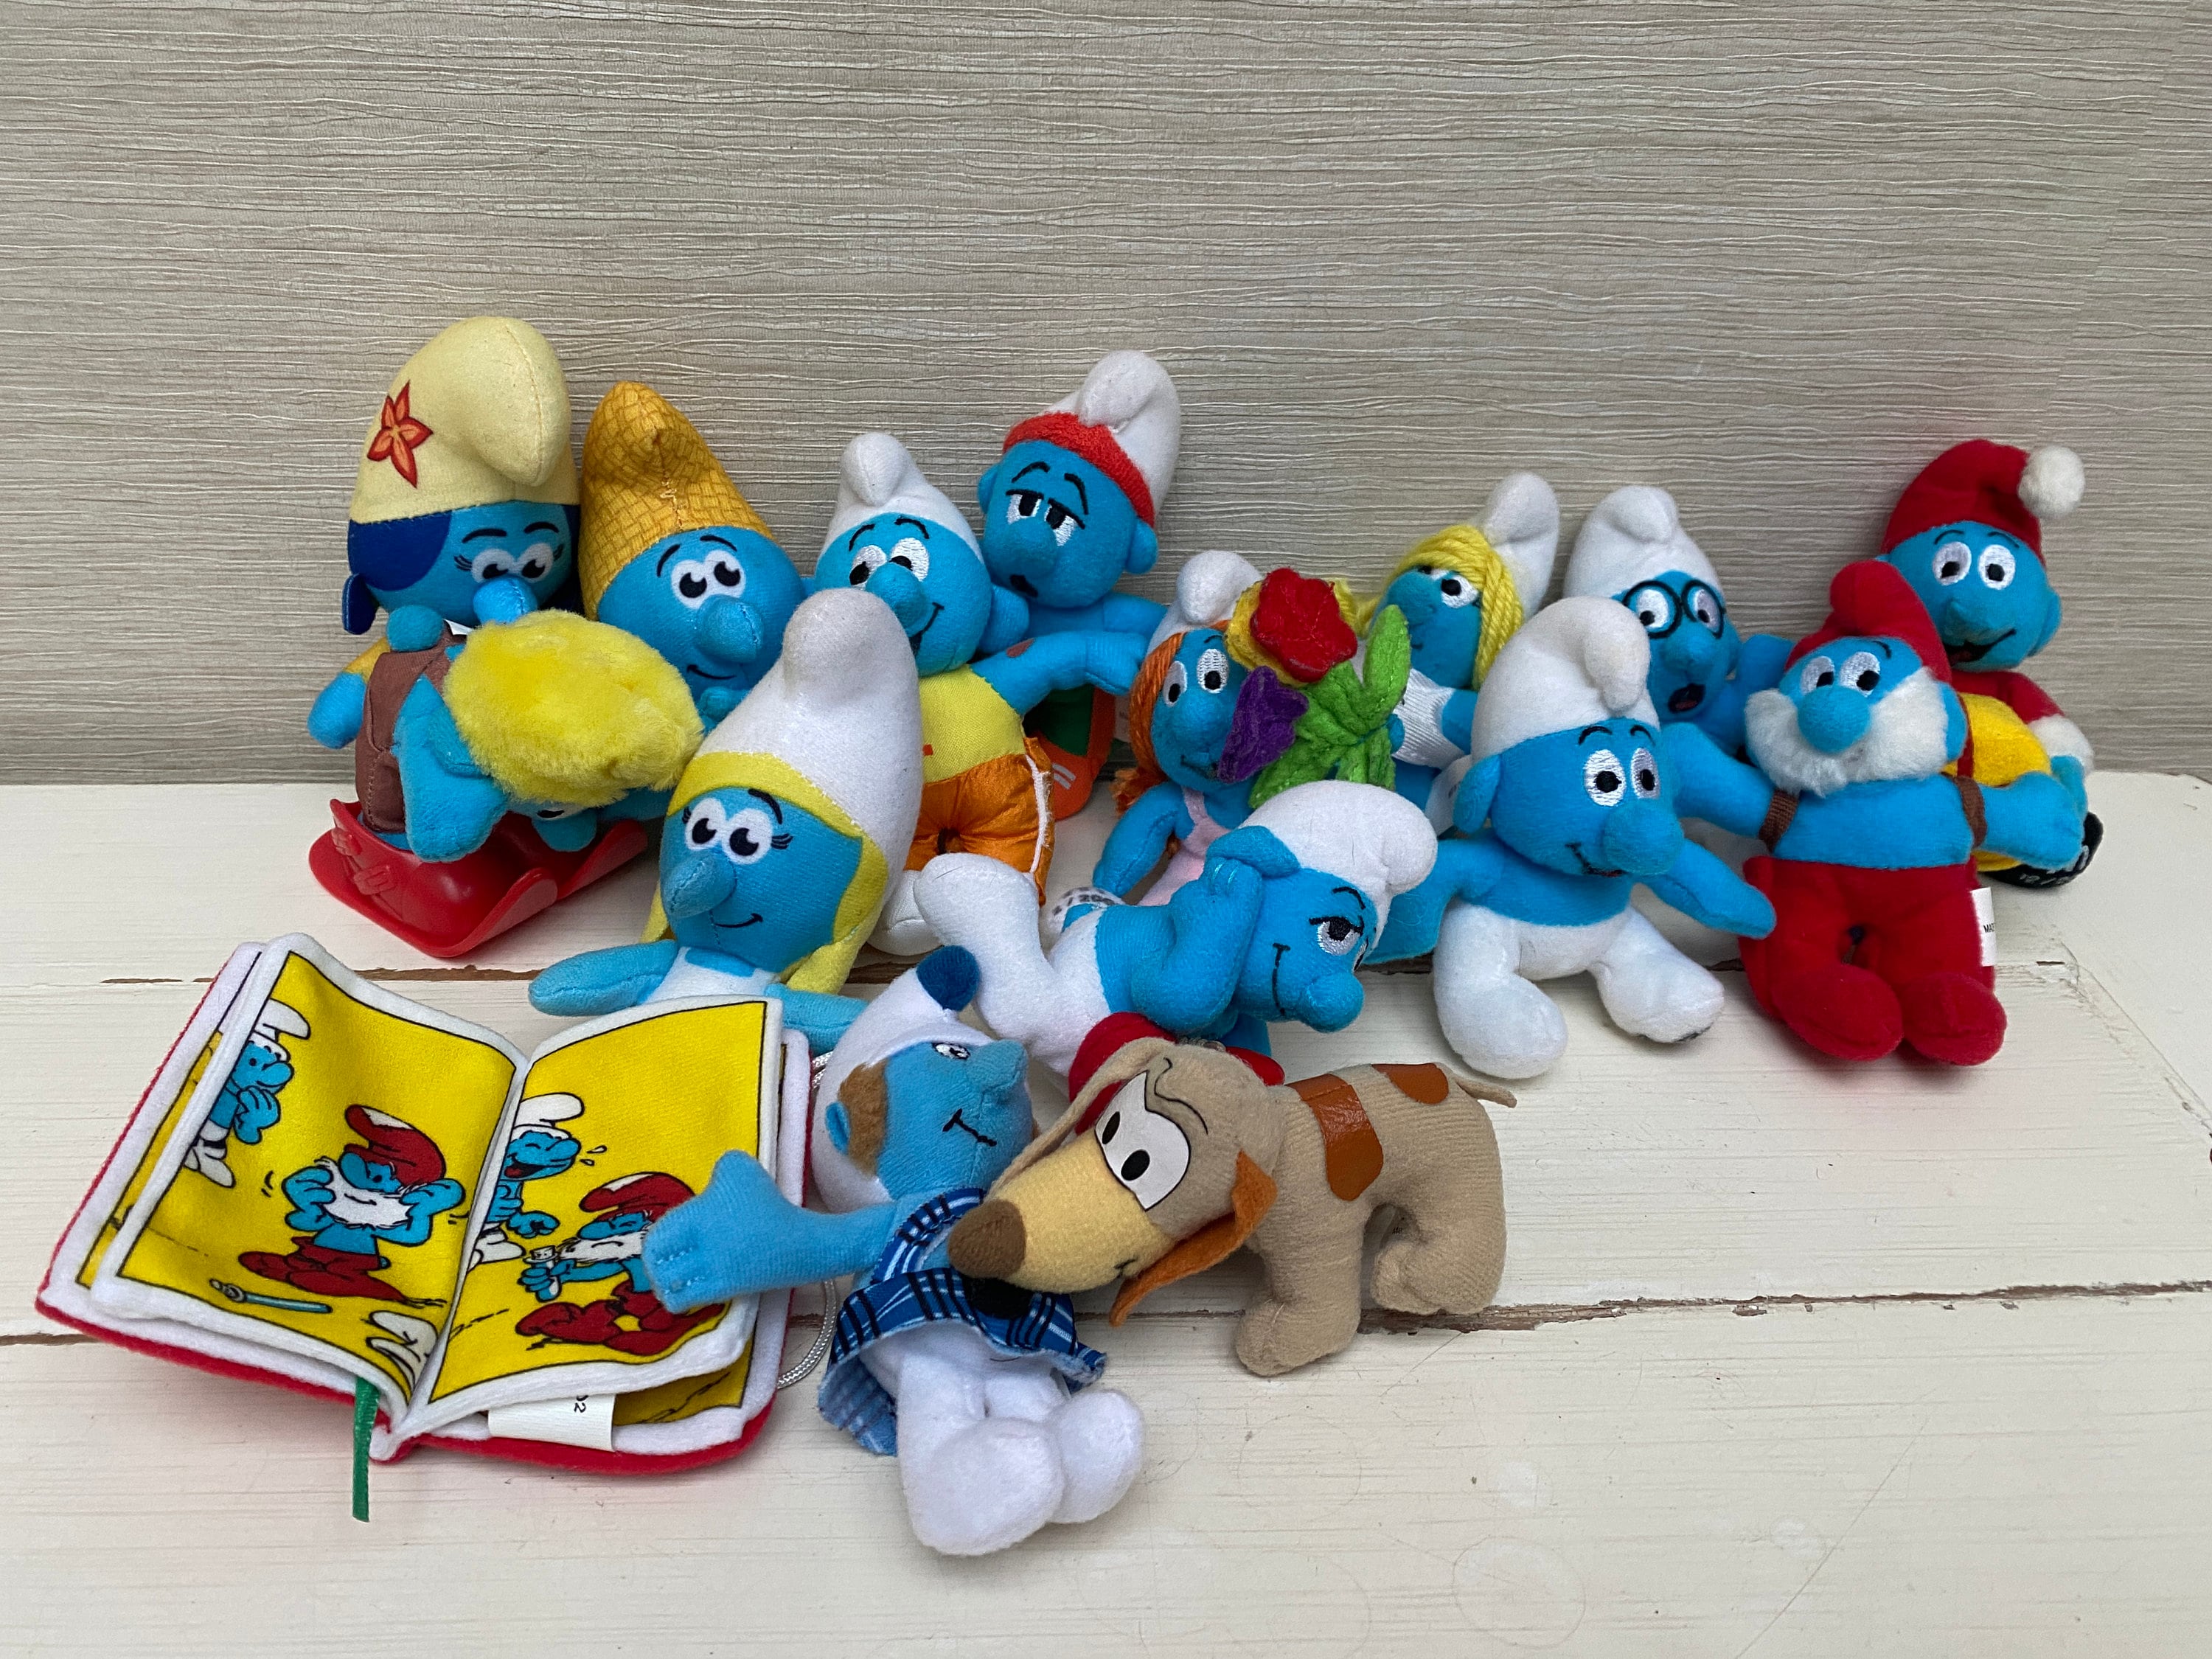 The Smurfs Vintage Mc Donalds Soft Toys 2000s to Date 